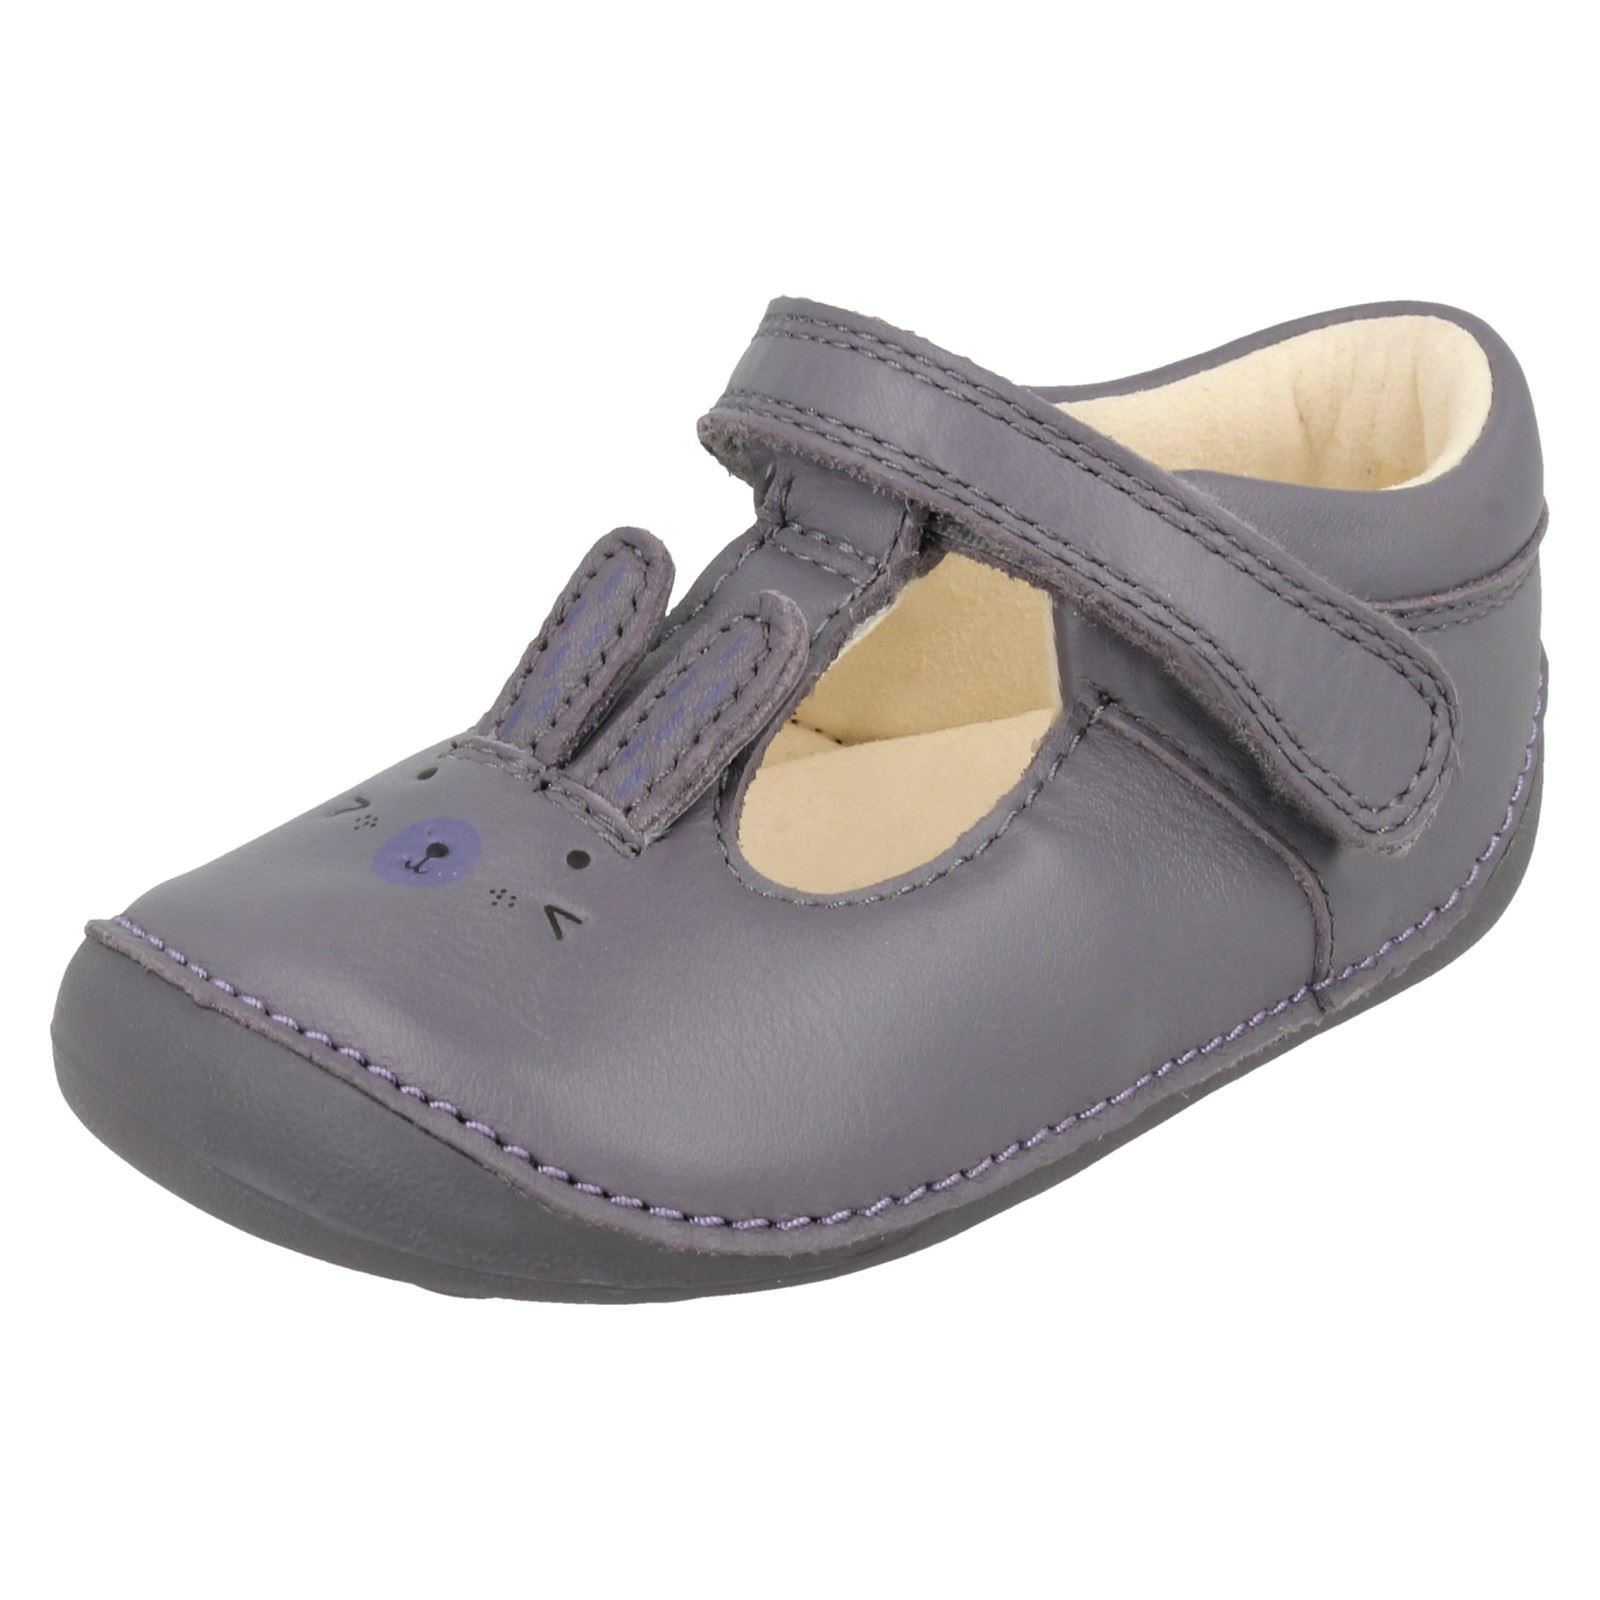 clarks baby girl first shoes off 69 